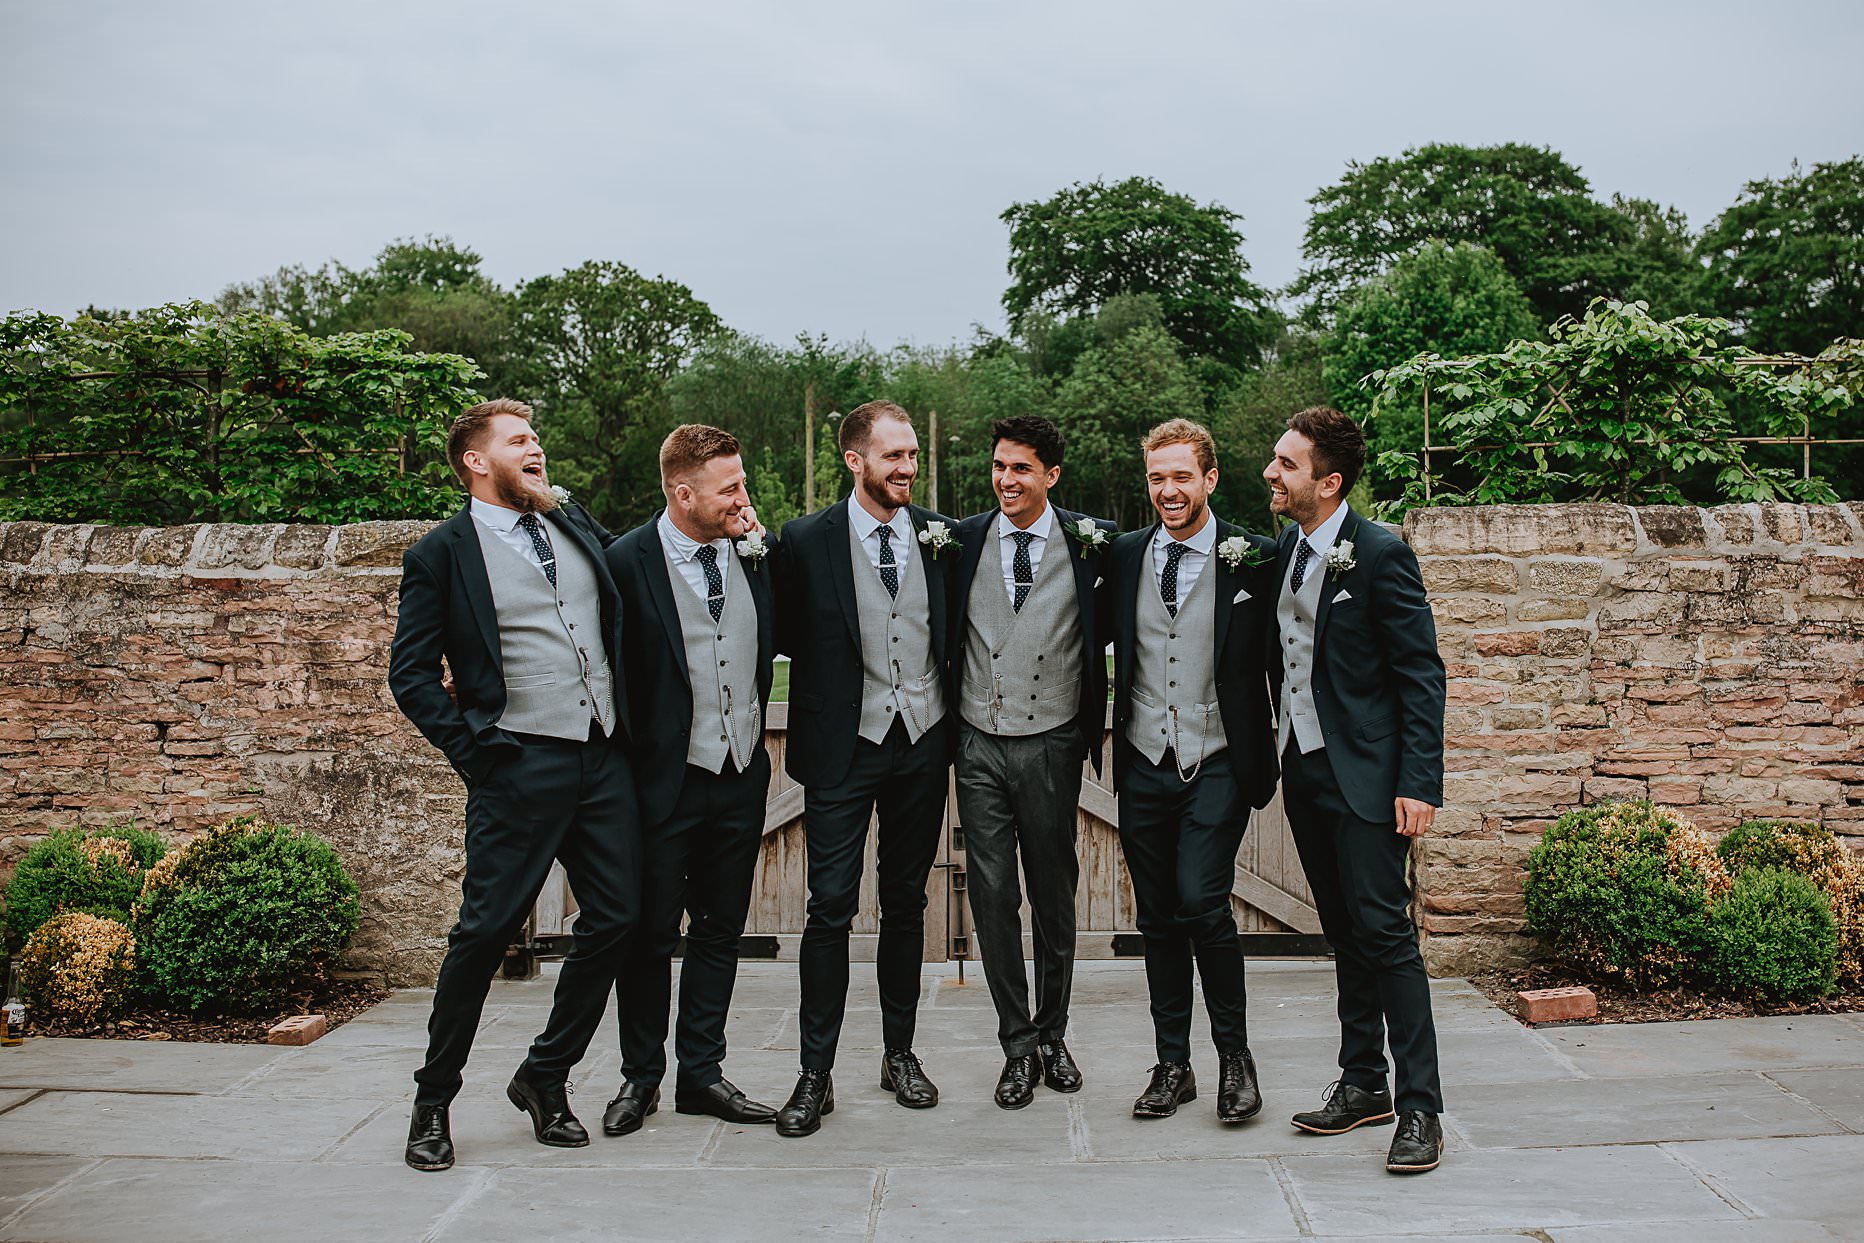 Groom and his groomsmen stood near a brick wall laughing and chatting. Groomsmen wear navy suits and a grey waistcoat.